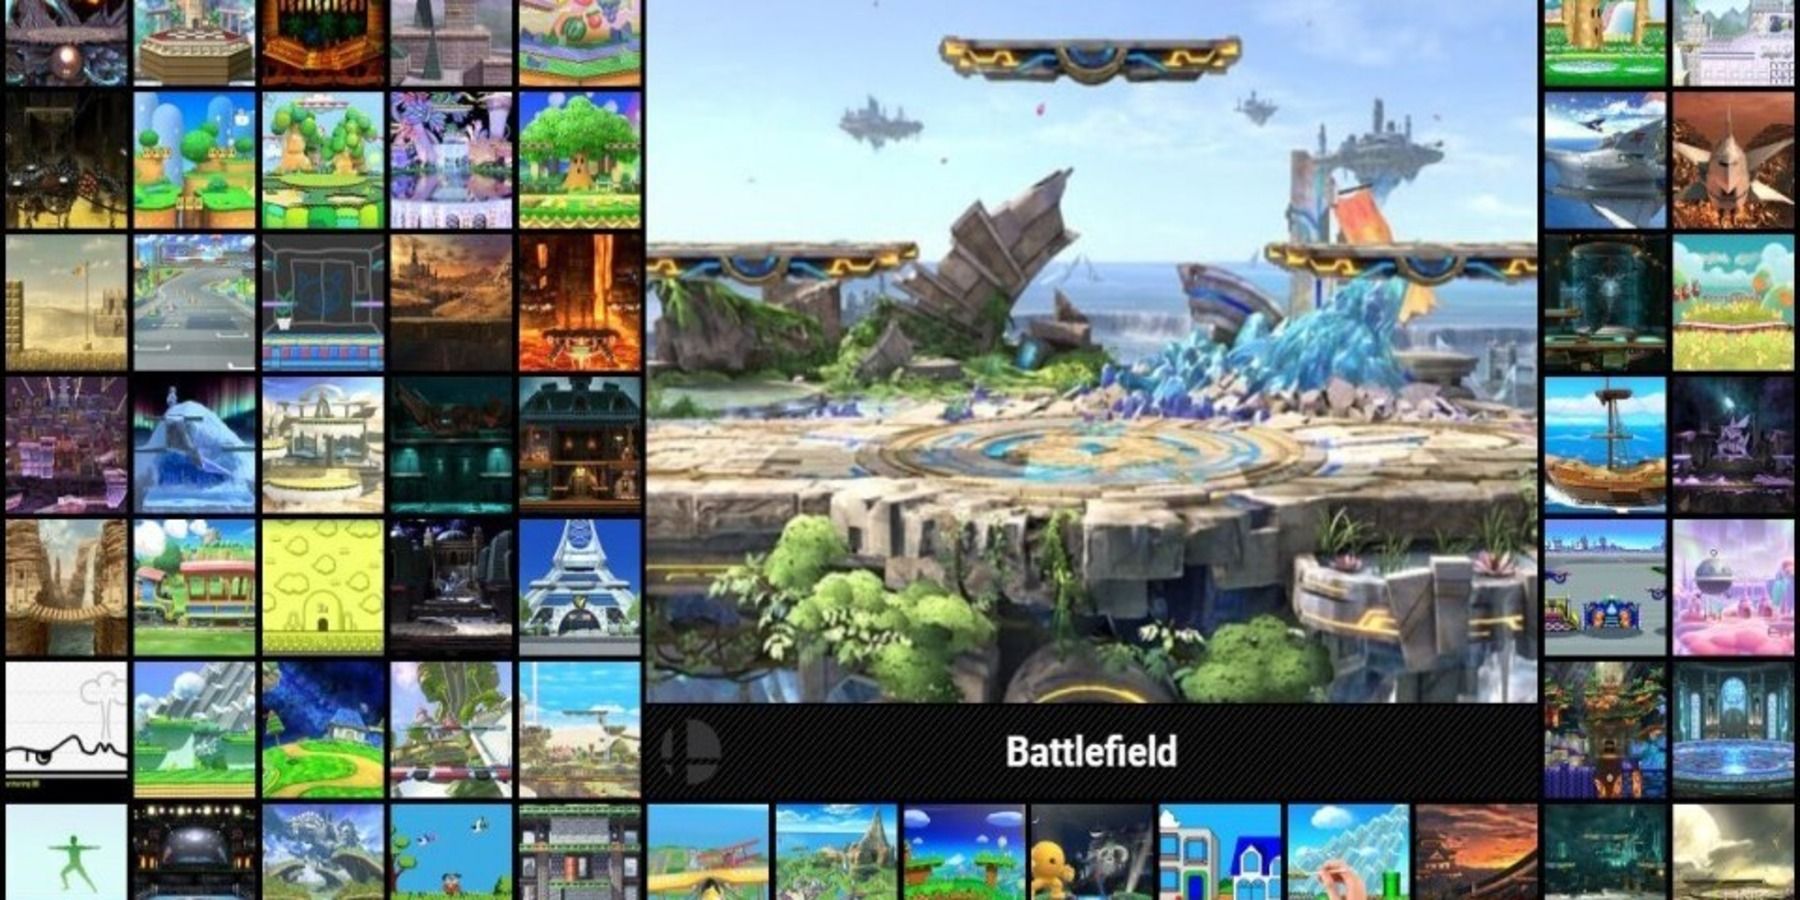 A list of many stages in Super Smash Bros. Ultimate, Battlefield being at the center.